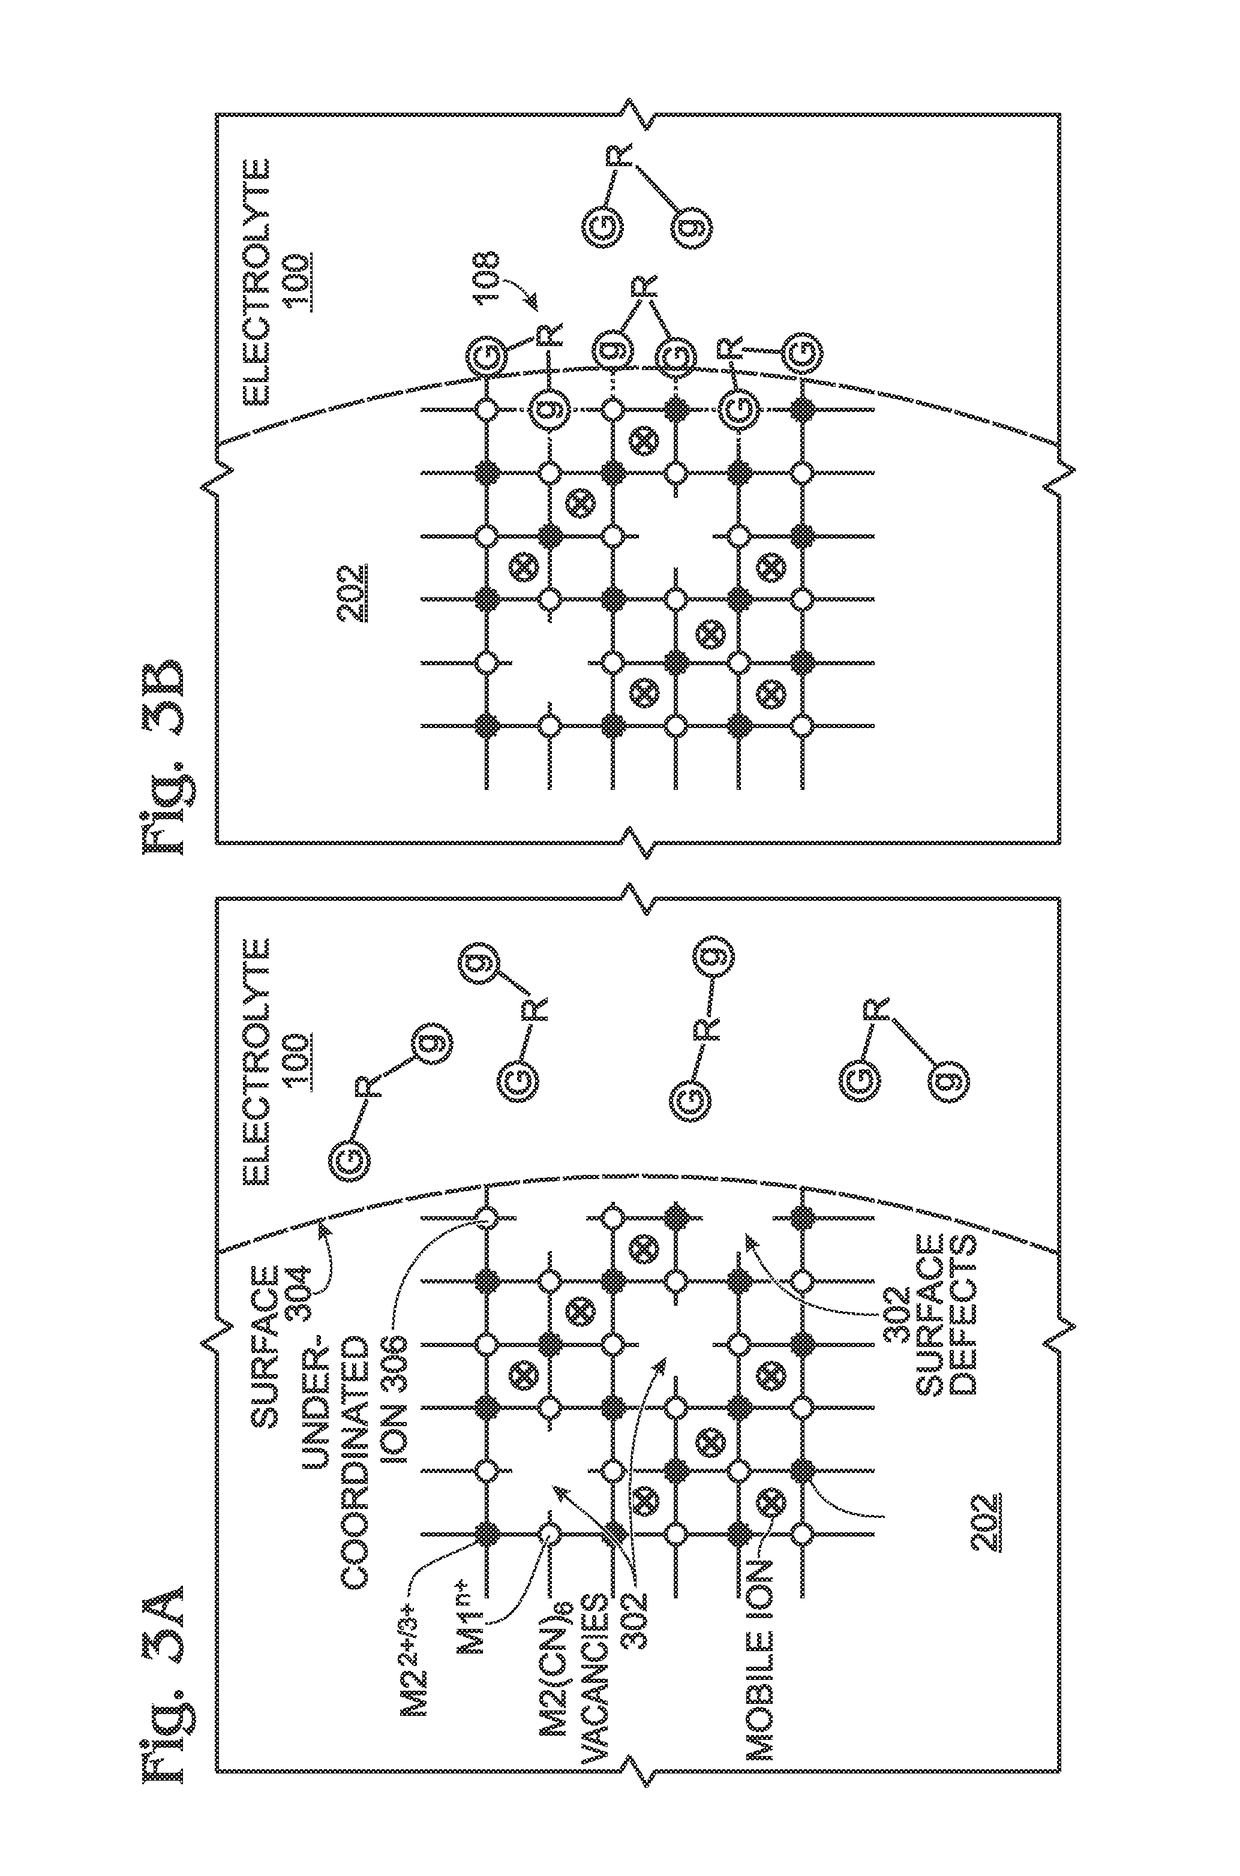 Electrolyte additives for transition metal cyanometallate electrode stabilization